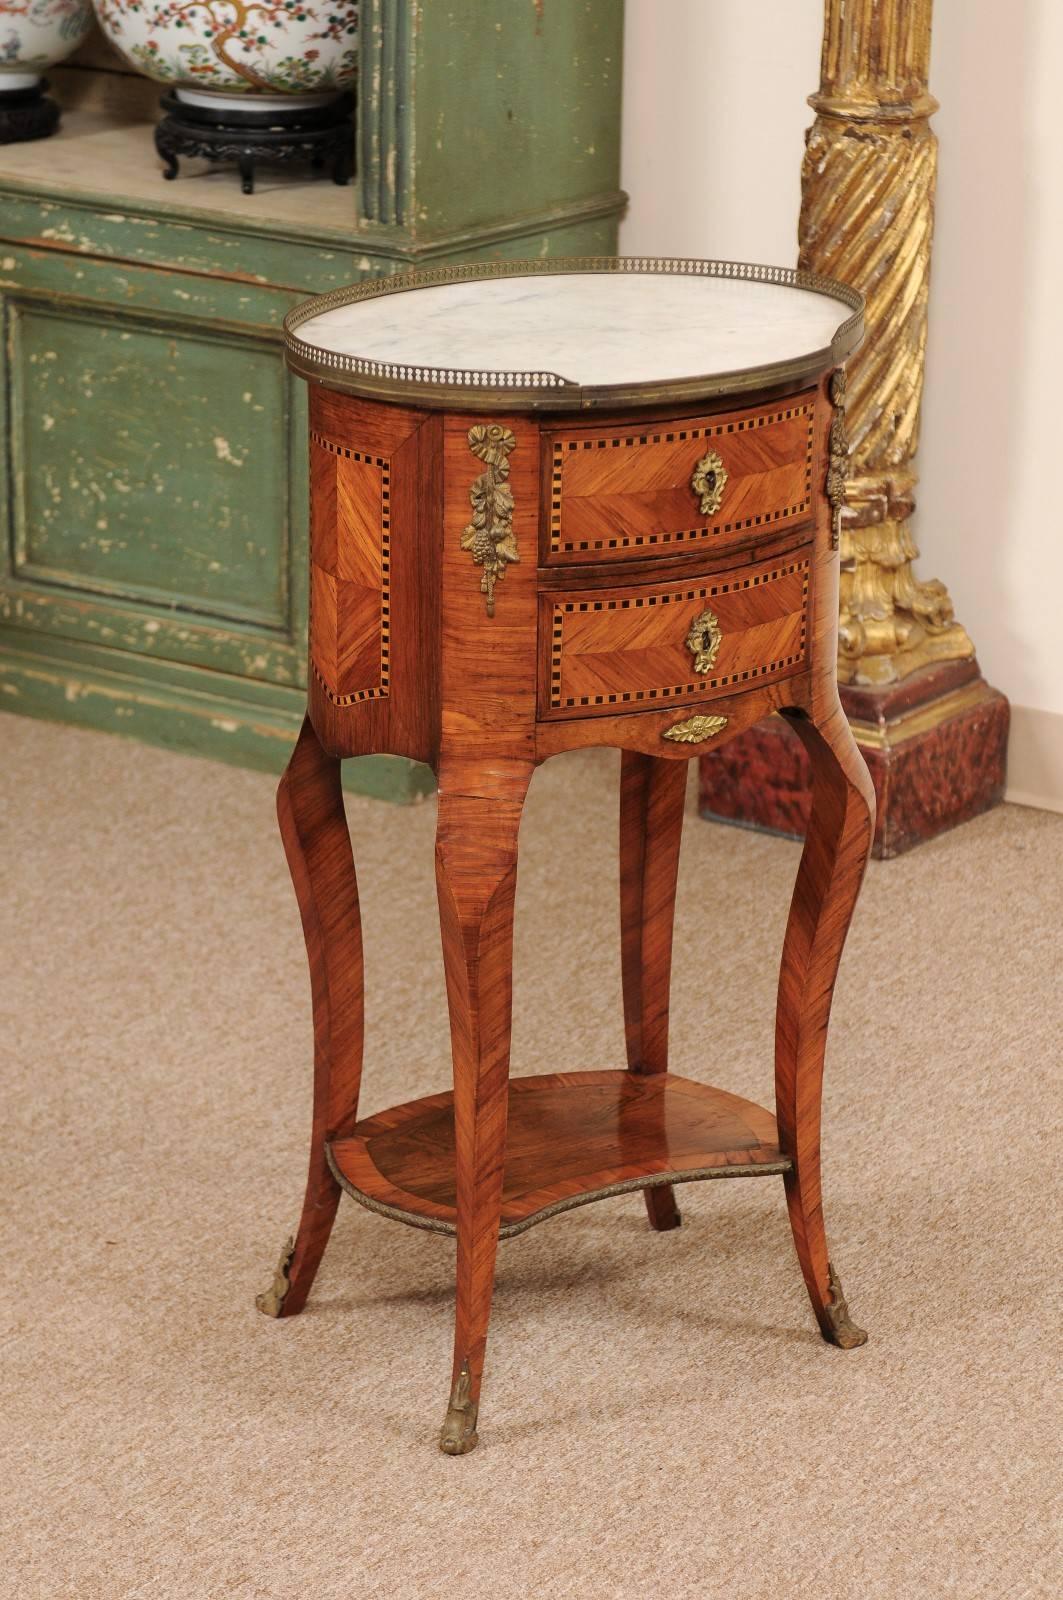 Ormolu 19th Century French Inlaid Tulipwood Chevet with Oval White Marble Top For Sale